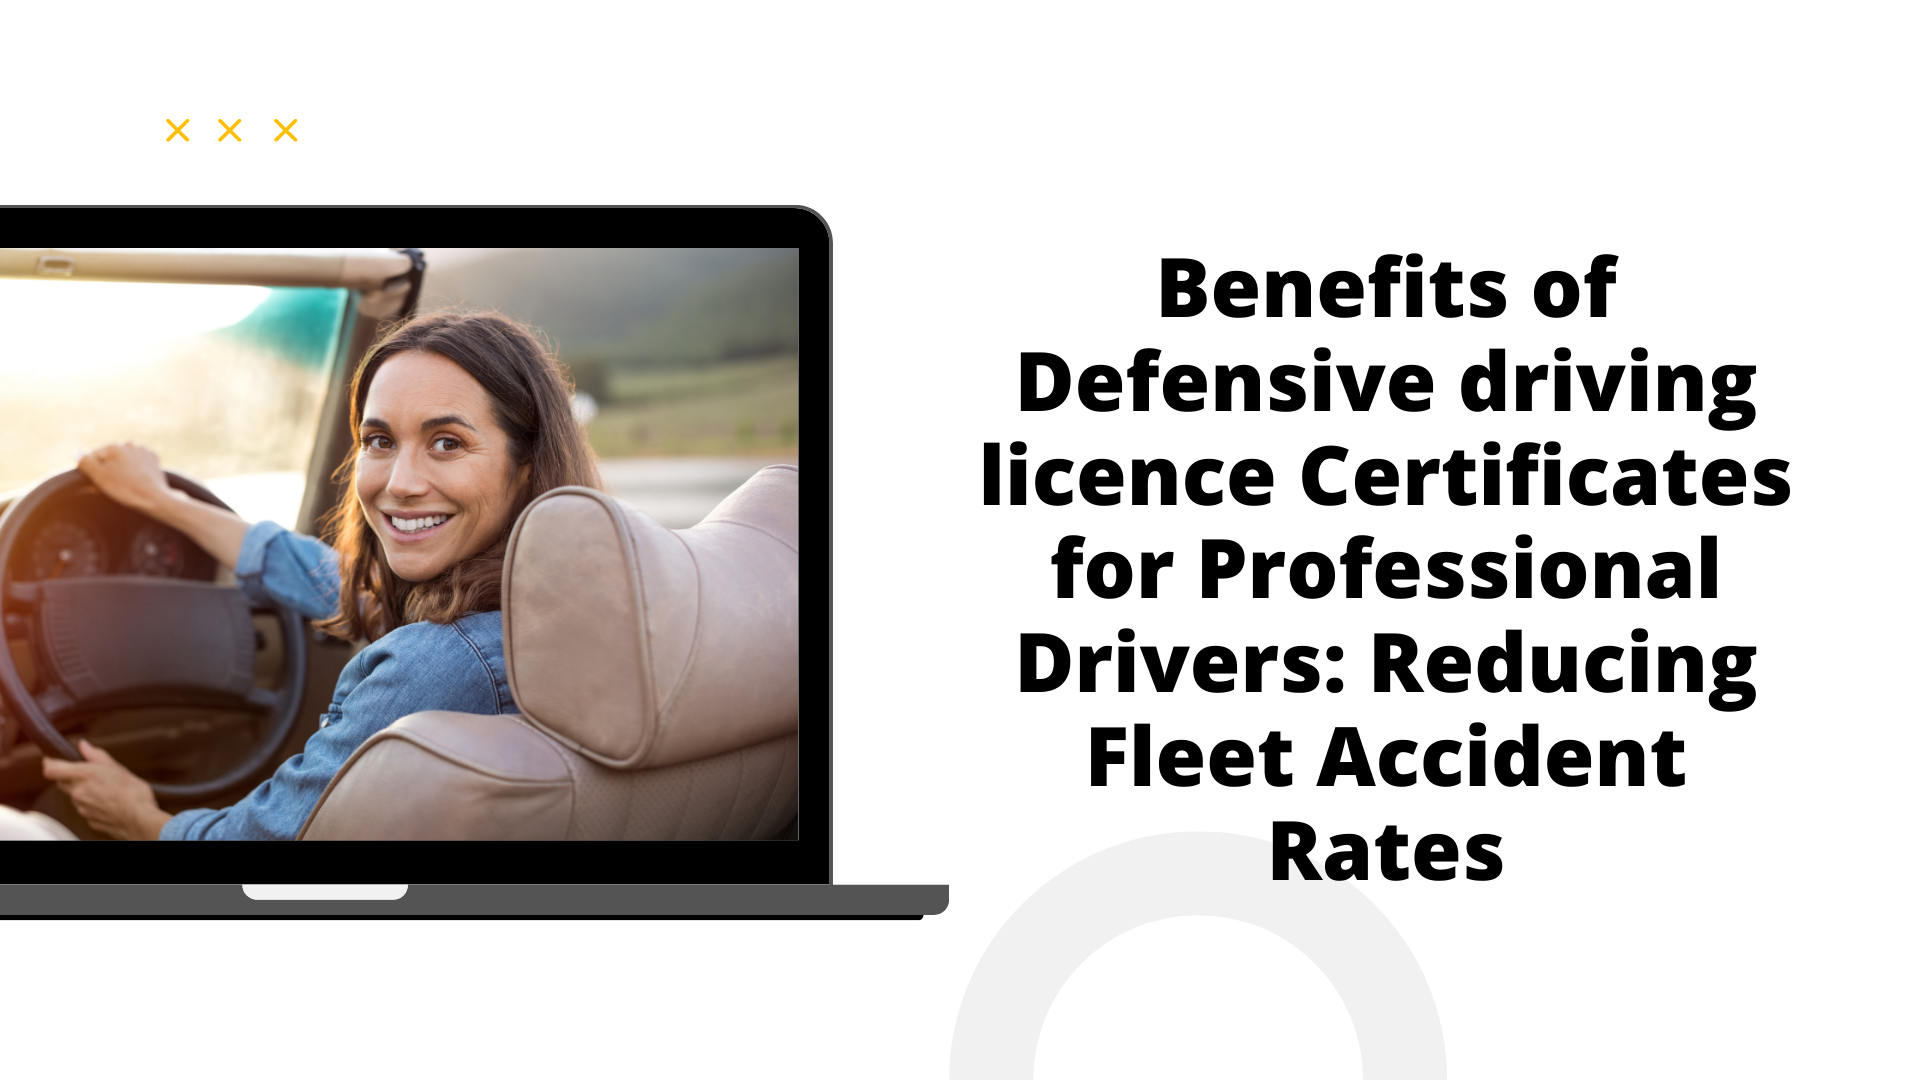 Benefits of Defensive driving licence Certificates for Professional Drivers Reducing Fleet Accident Rates